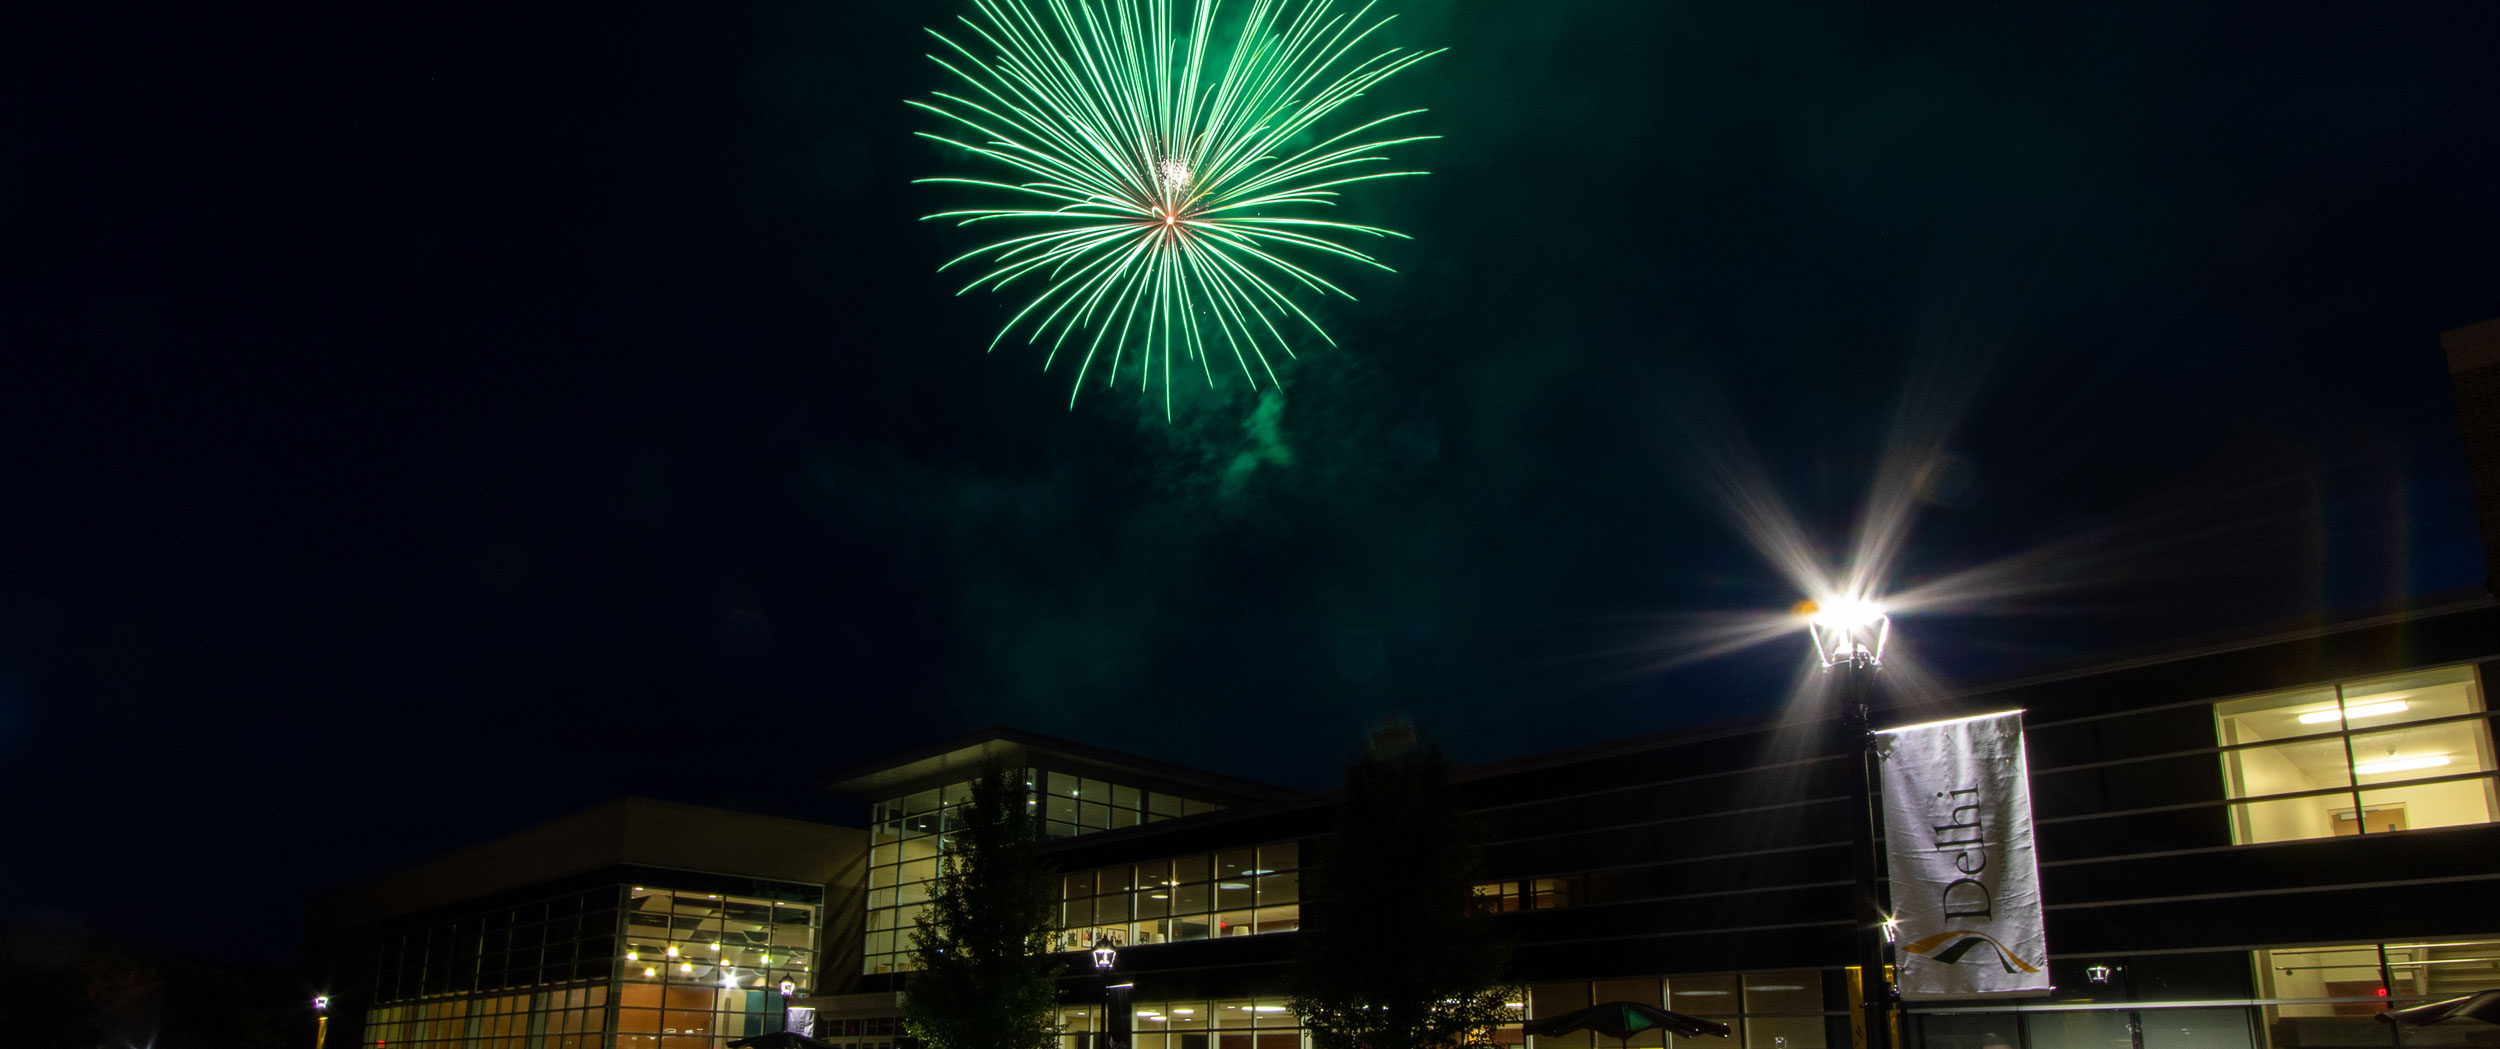 SUNY Delhi at night with fireworks in the sky